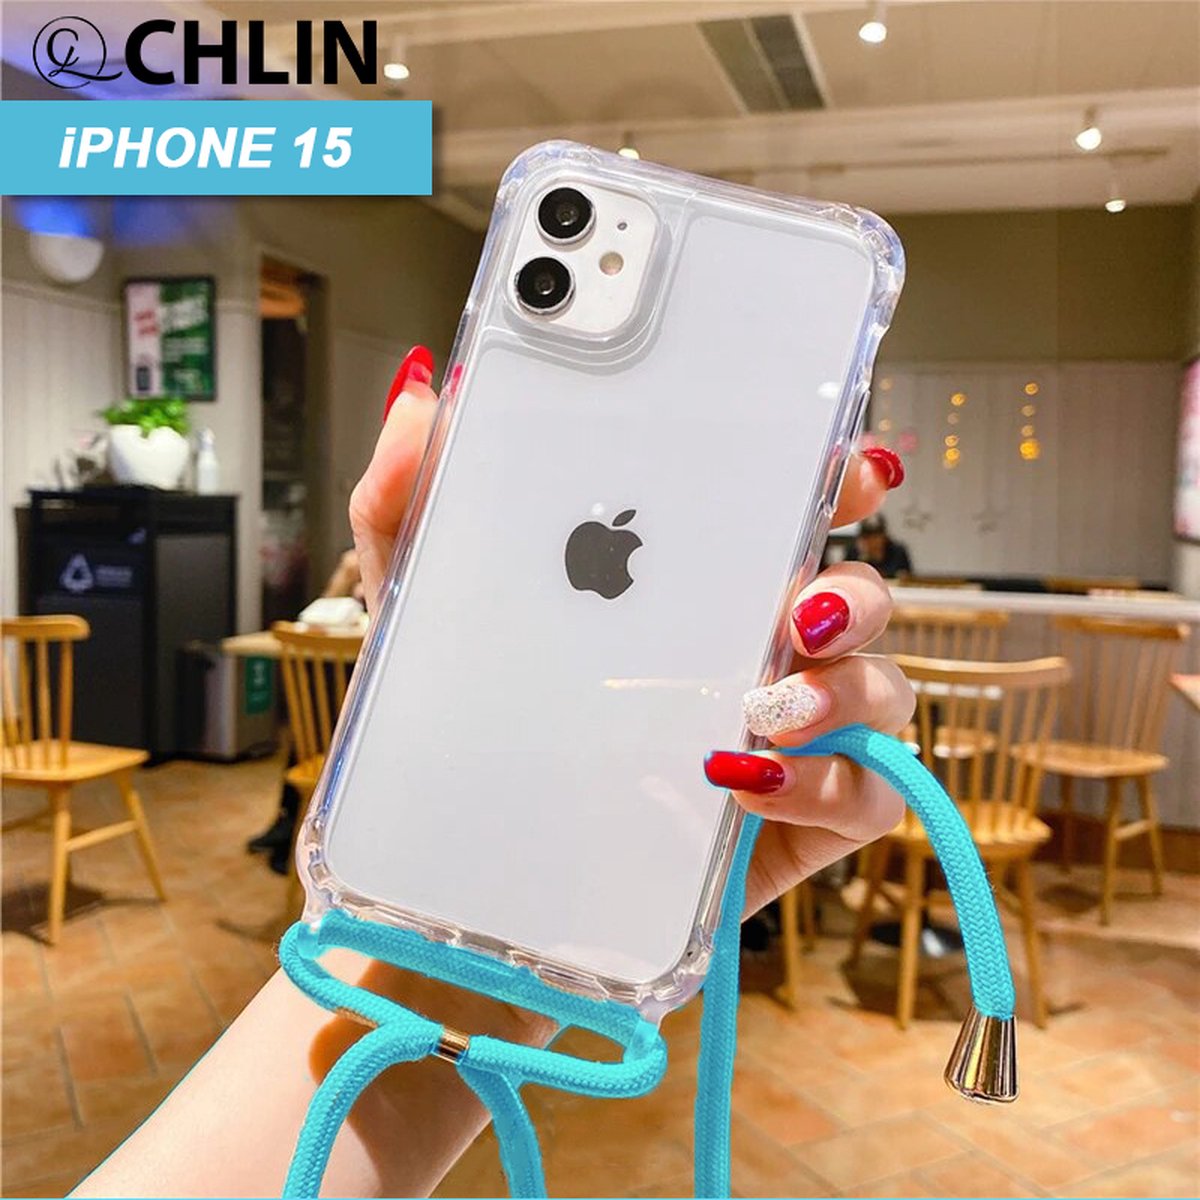 CL CHLIN® - iPhone 15 transparant hoesje met BLAUW koord - Hoesje met koord IPhone 15 - iPhone 15 case - iPhone 15 hoes - iphone hoesje met cord - iPhone 15 bescherming - iPhone 15 protector